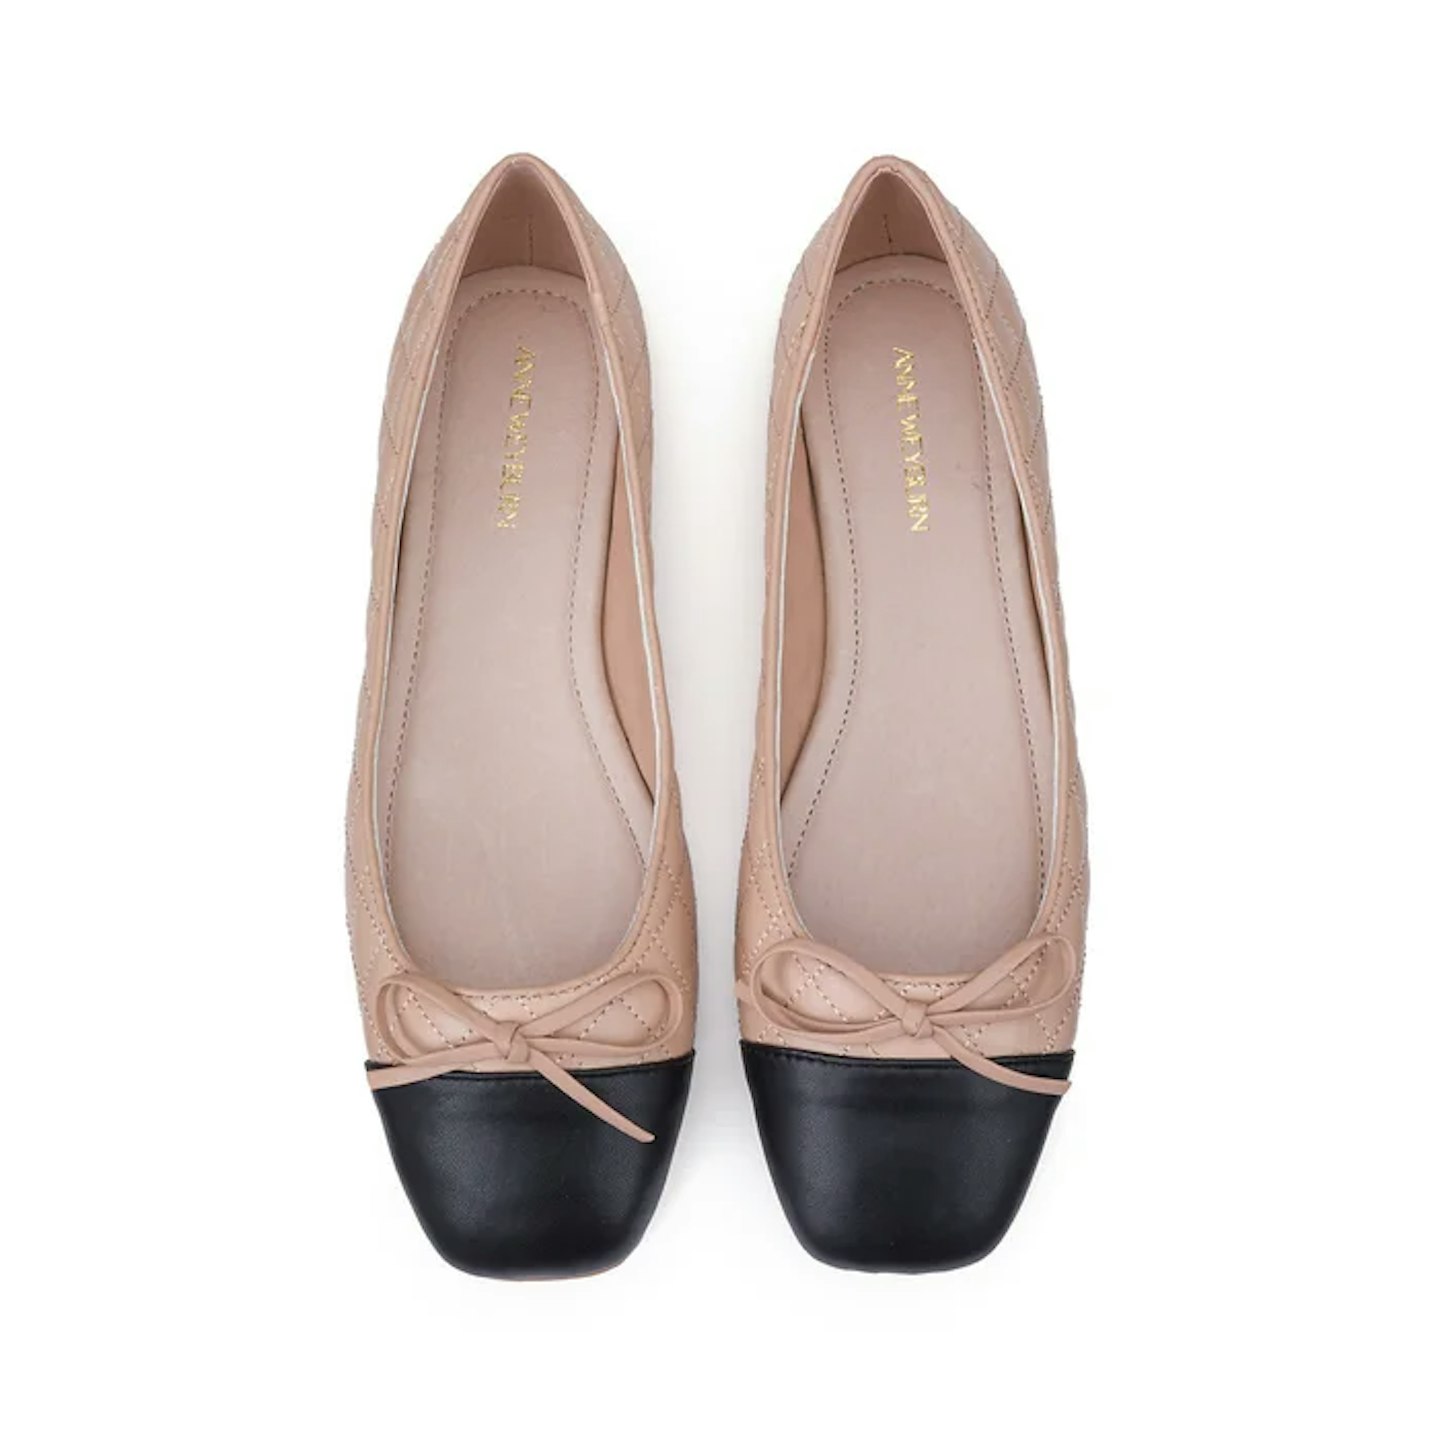 La Redoute's new £60 ballerina flats are great dupes for Chanel's